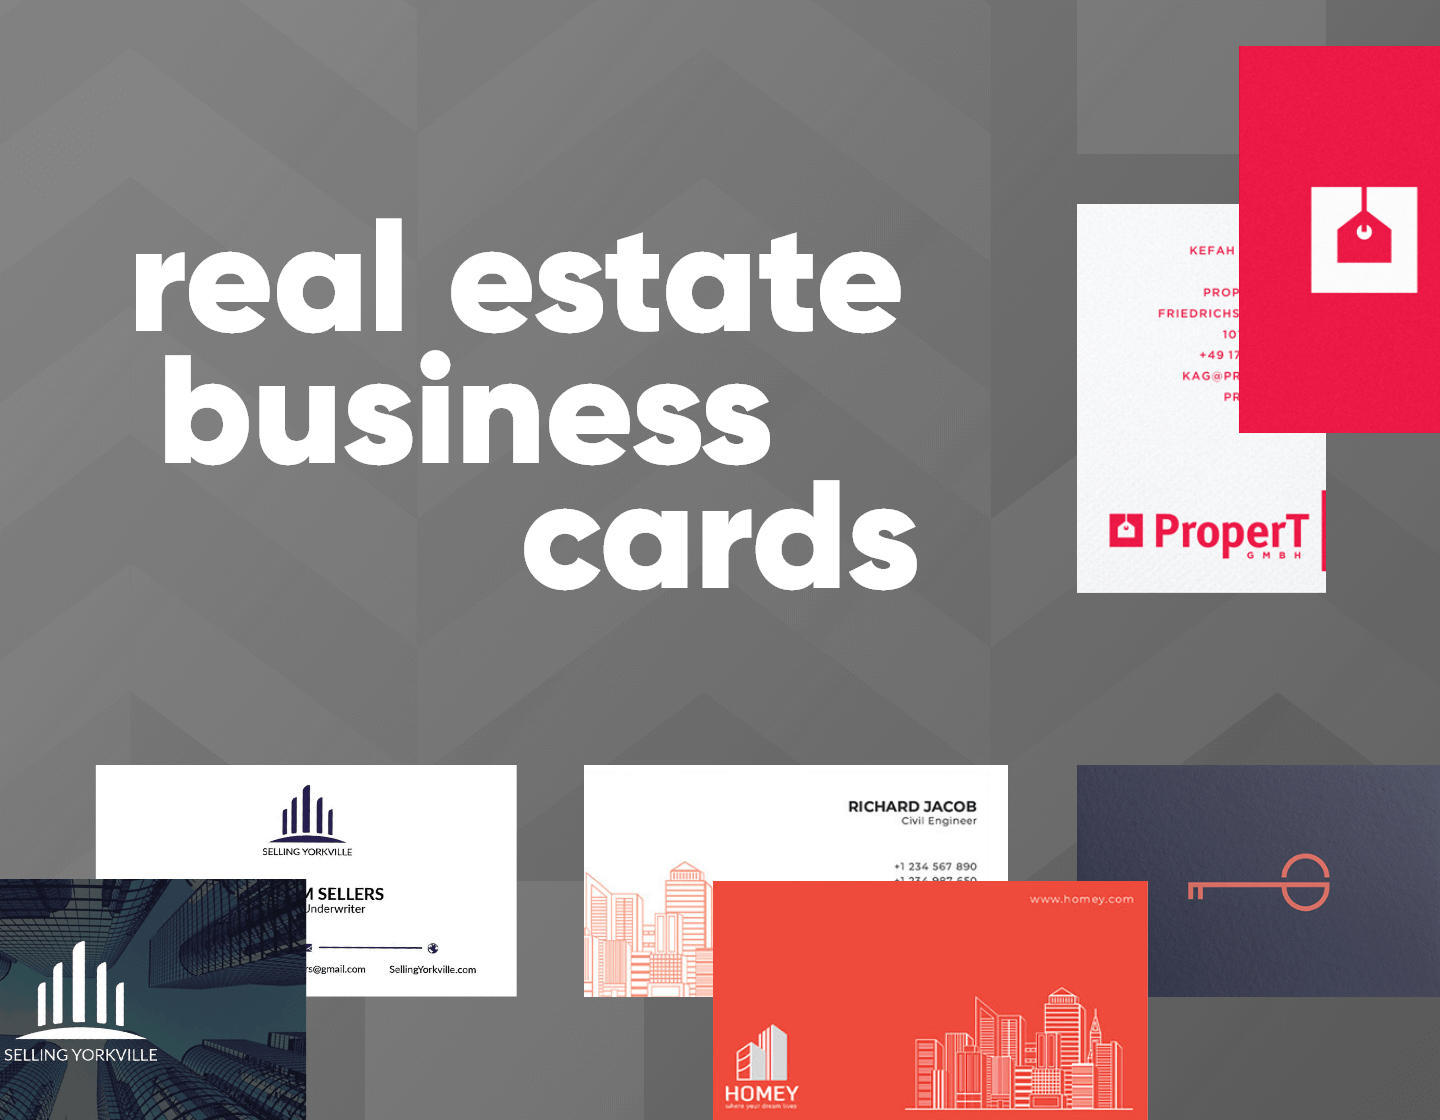 Real estate business card examples